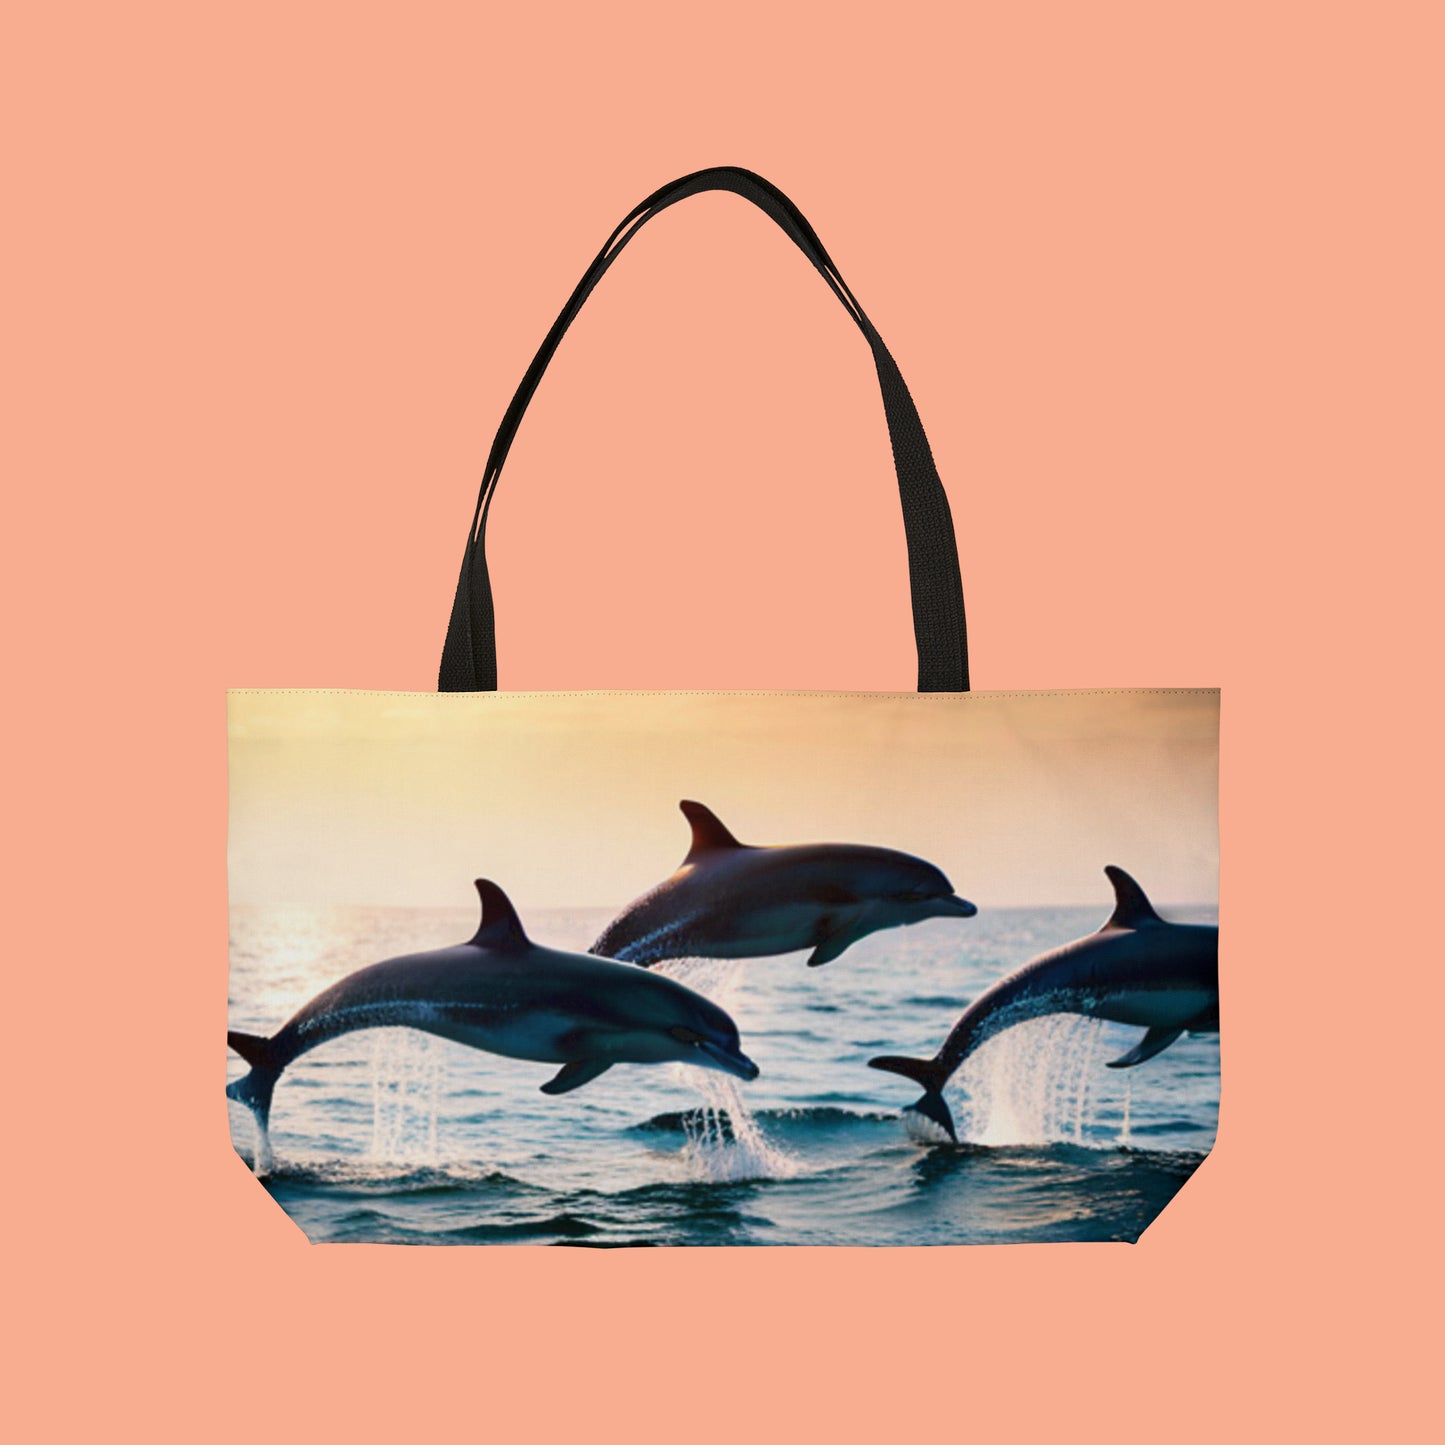 Dolphins playing as they are known to do on this beautiful Weekender Tote Bag.